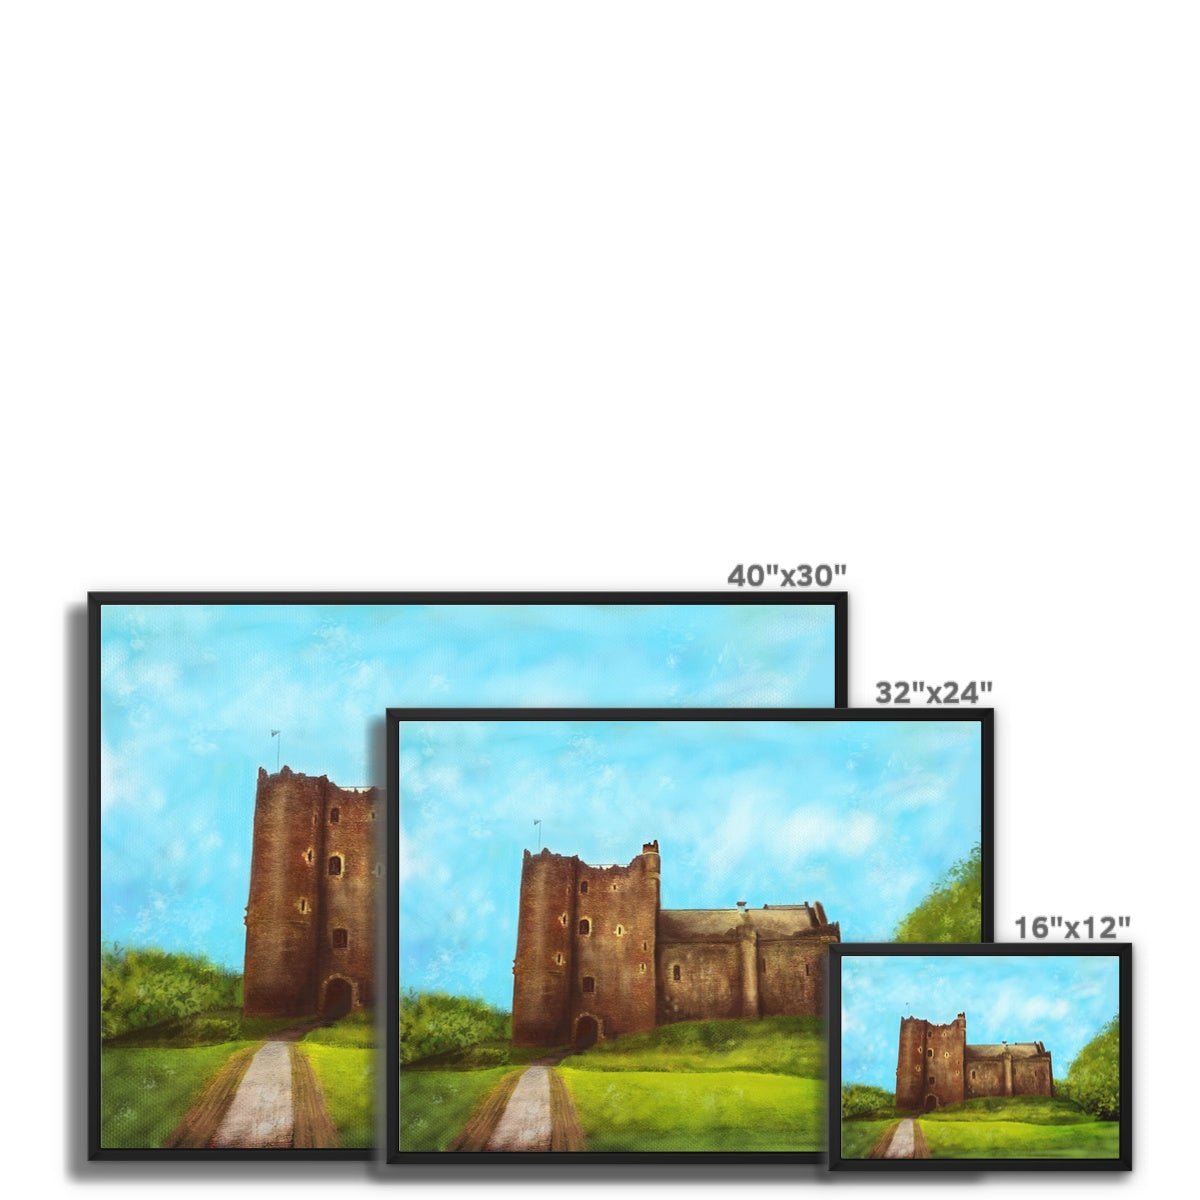 Doune Castle Painting | Framed Canvas From Scotland-Floating Framed Canvas Prints-Scottish Castles Art Gallery-Paintings, Prints, Homeware, Art Gifts From Scotland By Scottish Artist Kevin Hunter